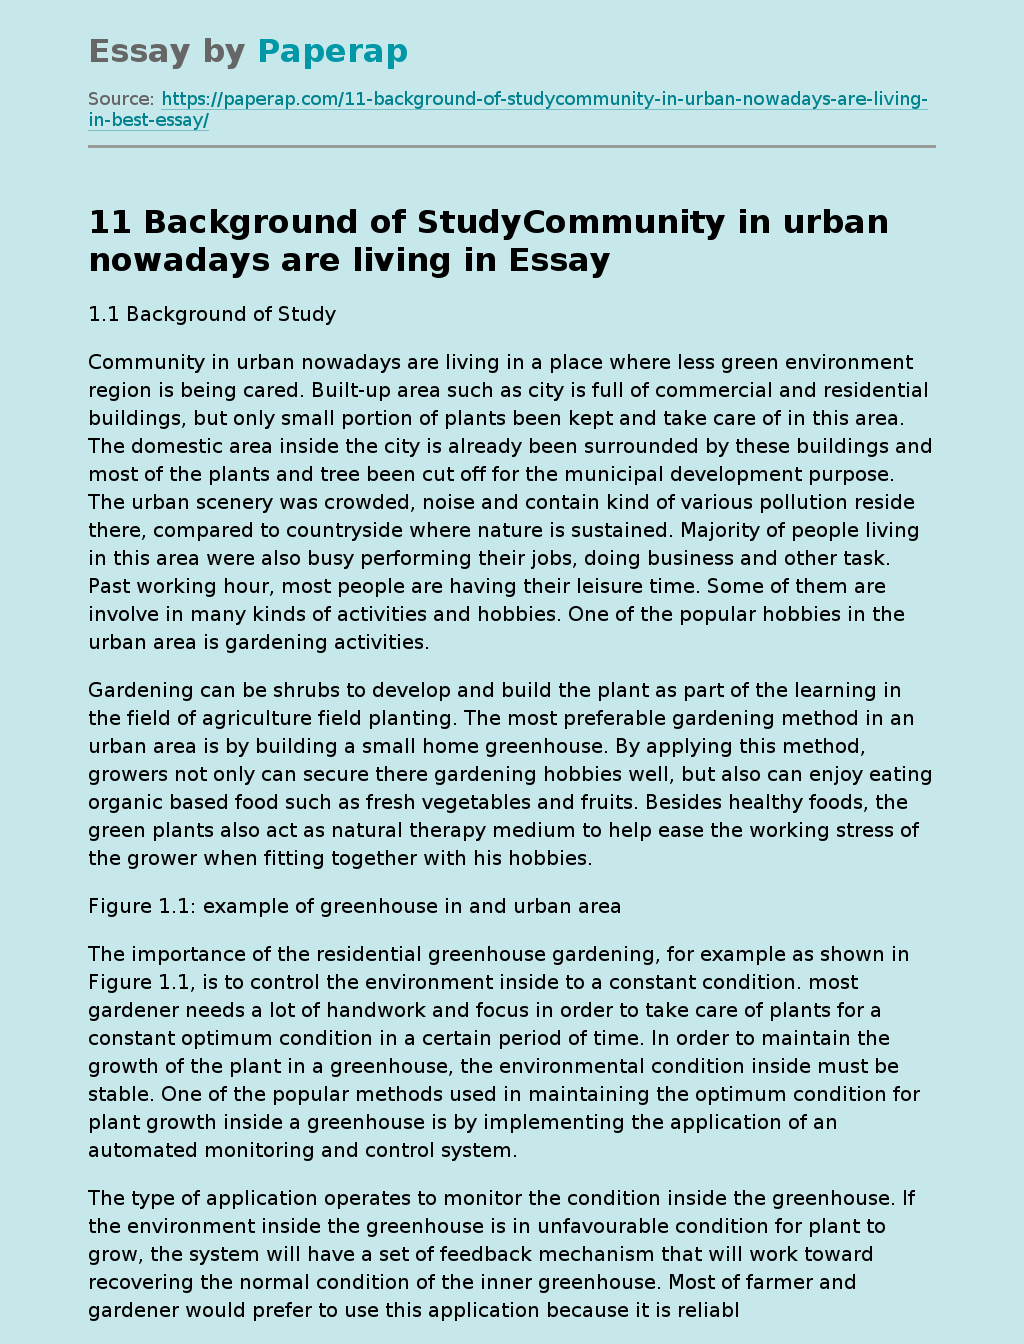 11 Background of StudyCommunity in urban nowadays are living in